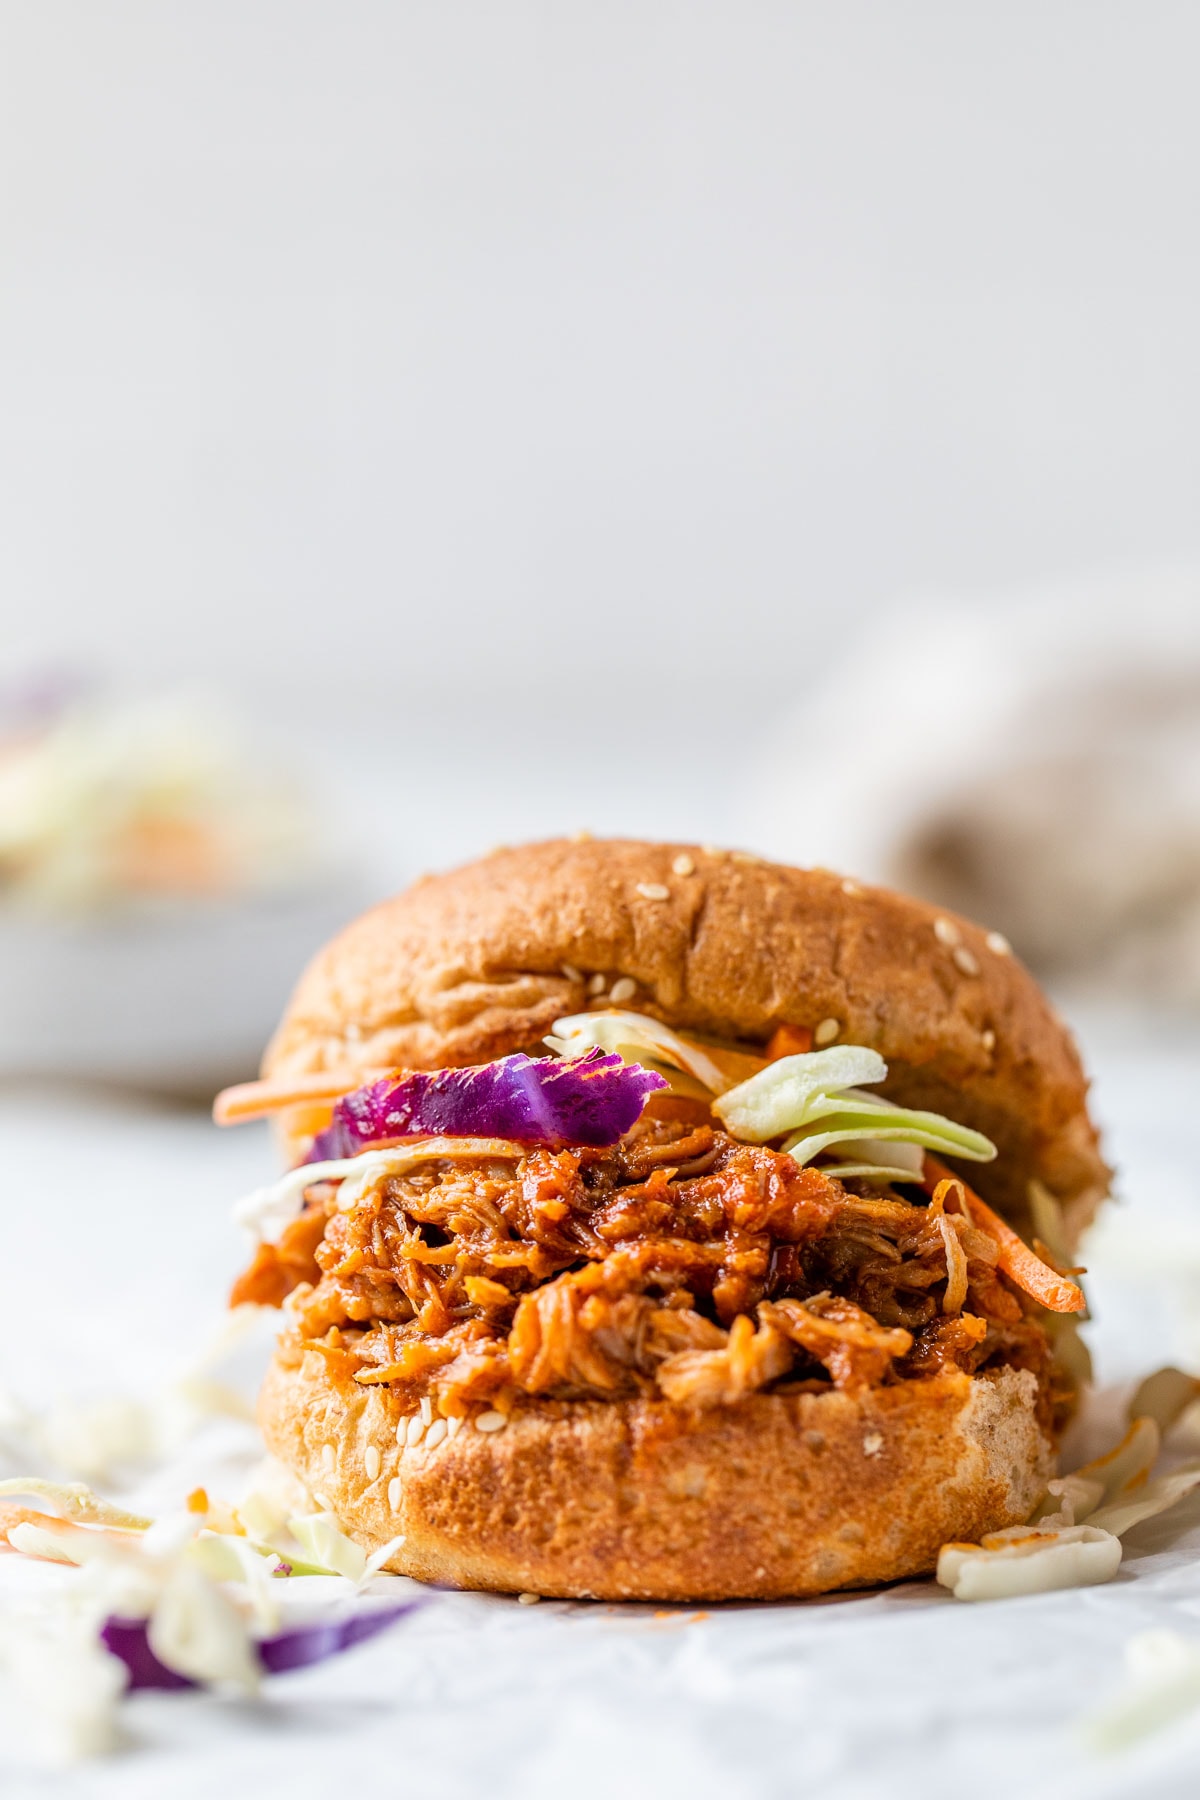 Easy Instant Pot Pulled Pork: A Crowd-Pleaser